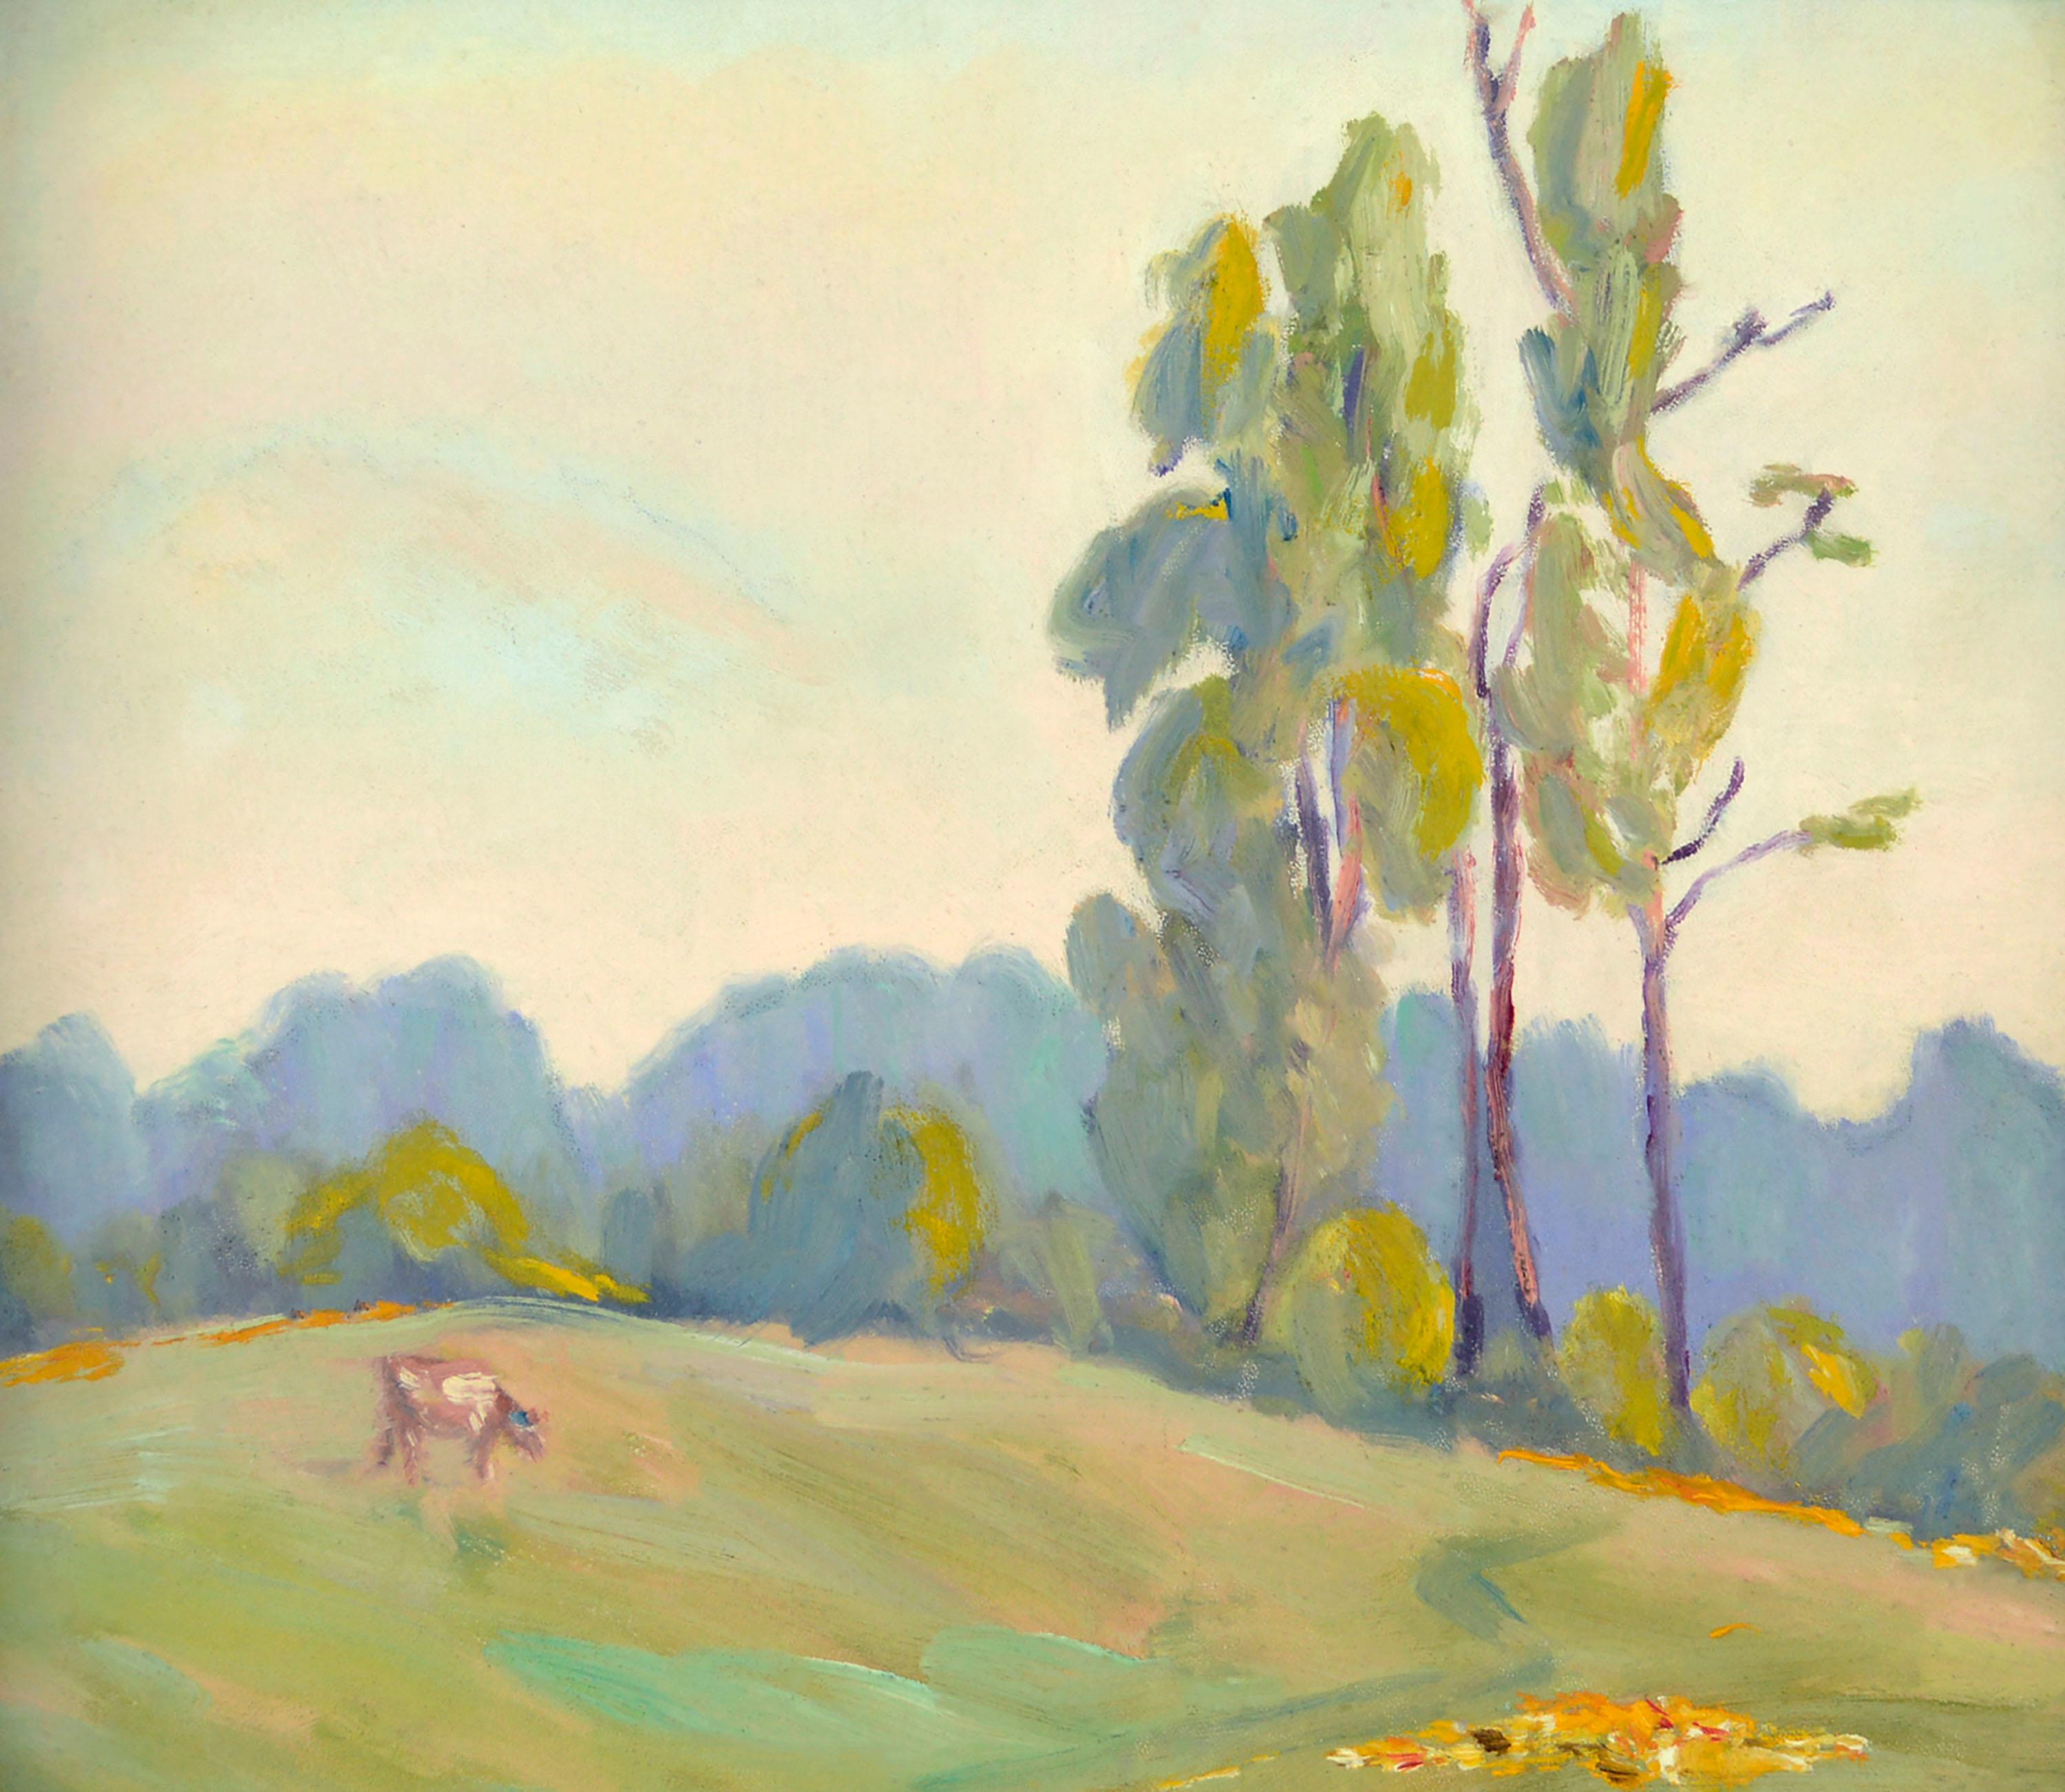 Early 20th Century California Pasture with Cow & Eucalyptus Trees Landscape - Painting by Unknown